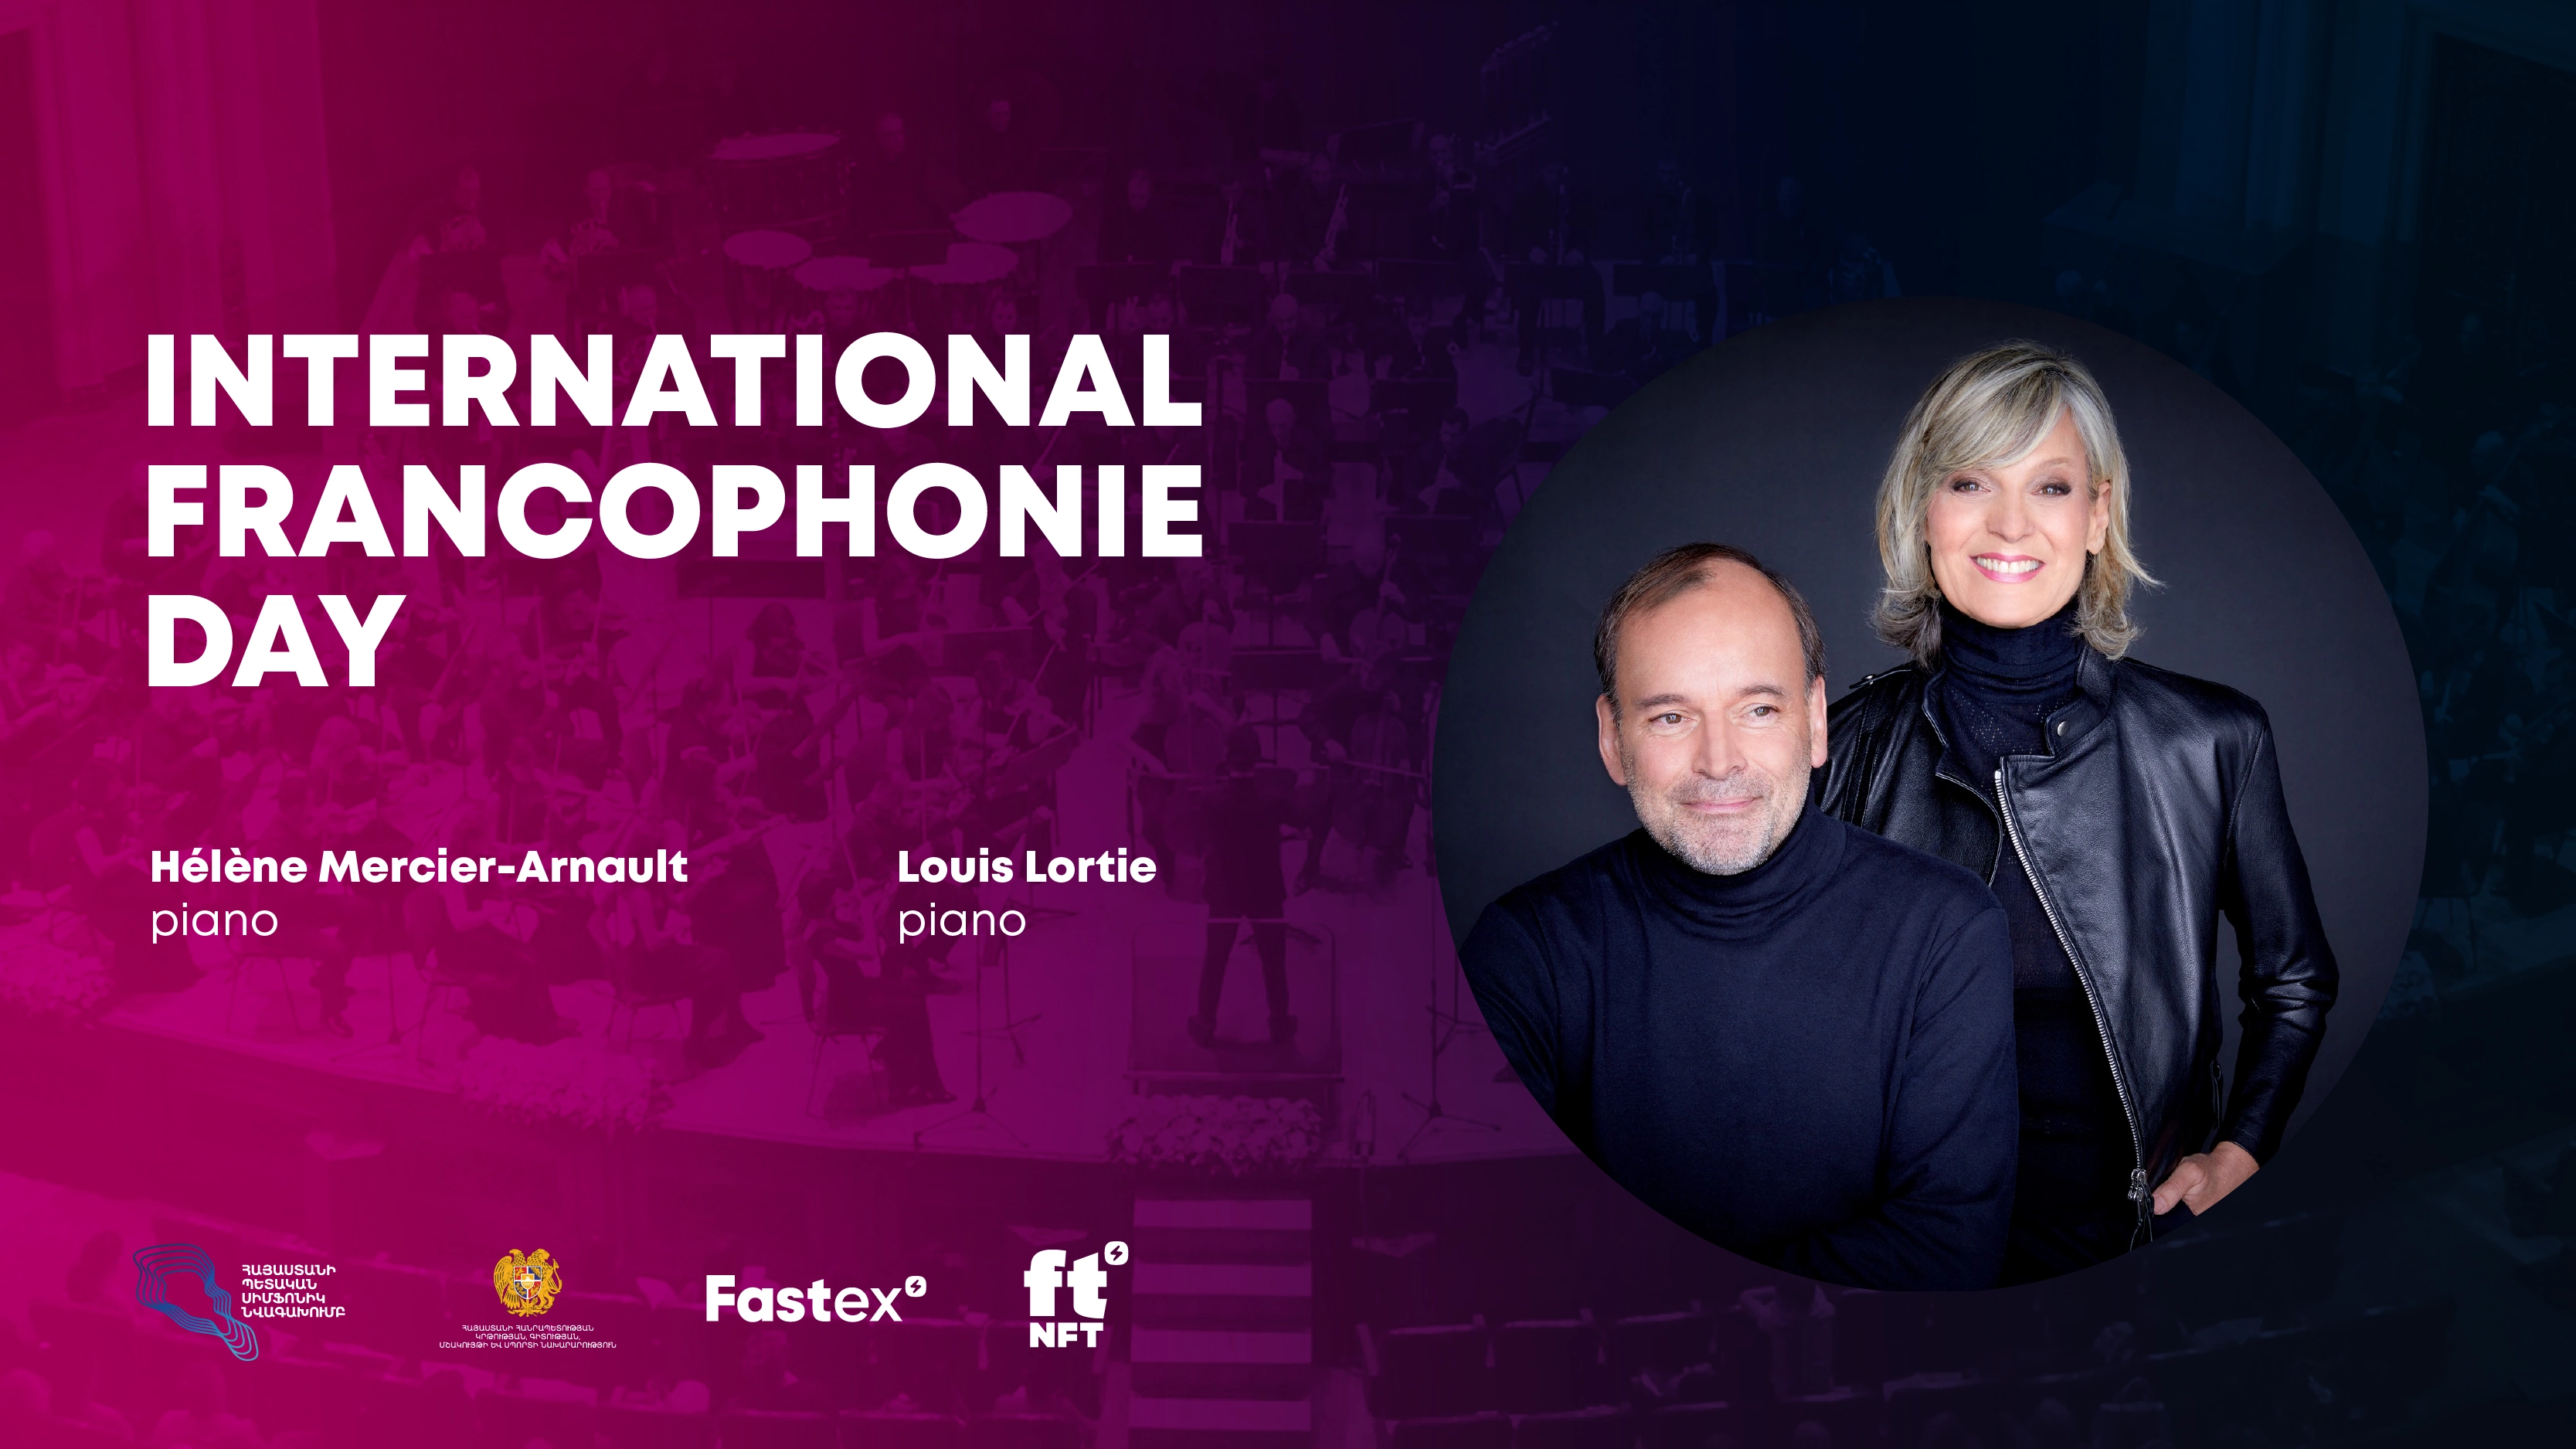 Fastex and ftNFT Support the Symphonic Concert Dedicated to the International Francophonie Day